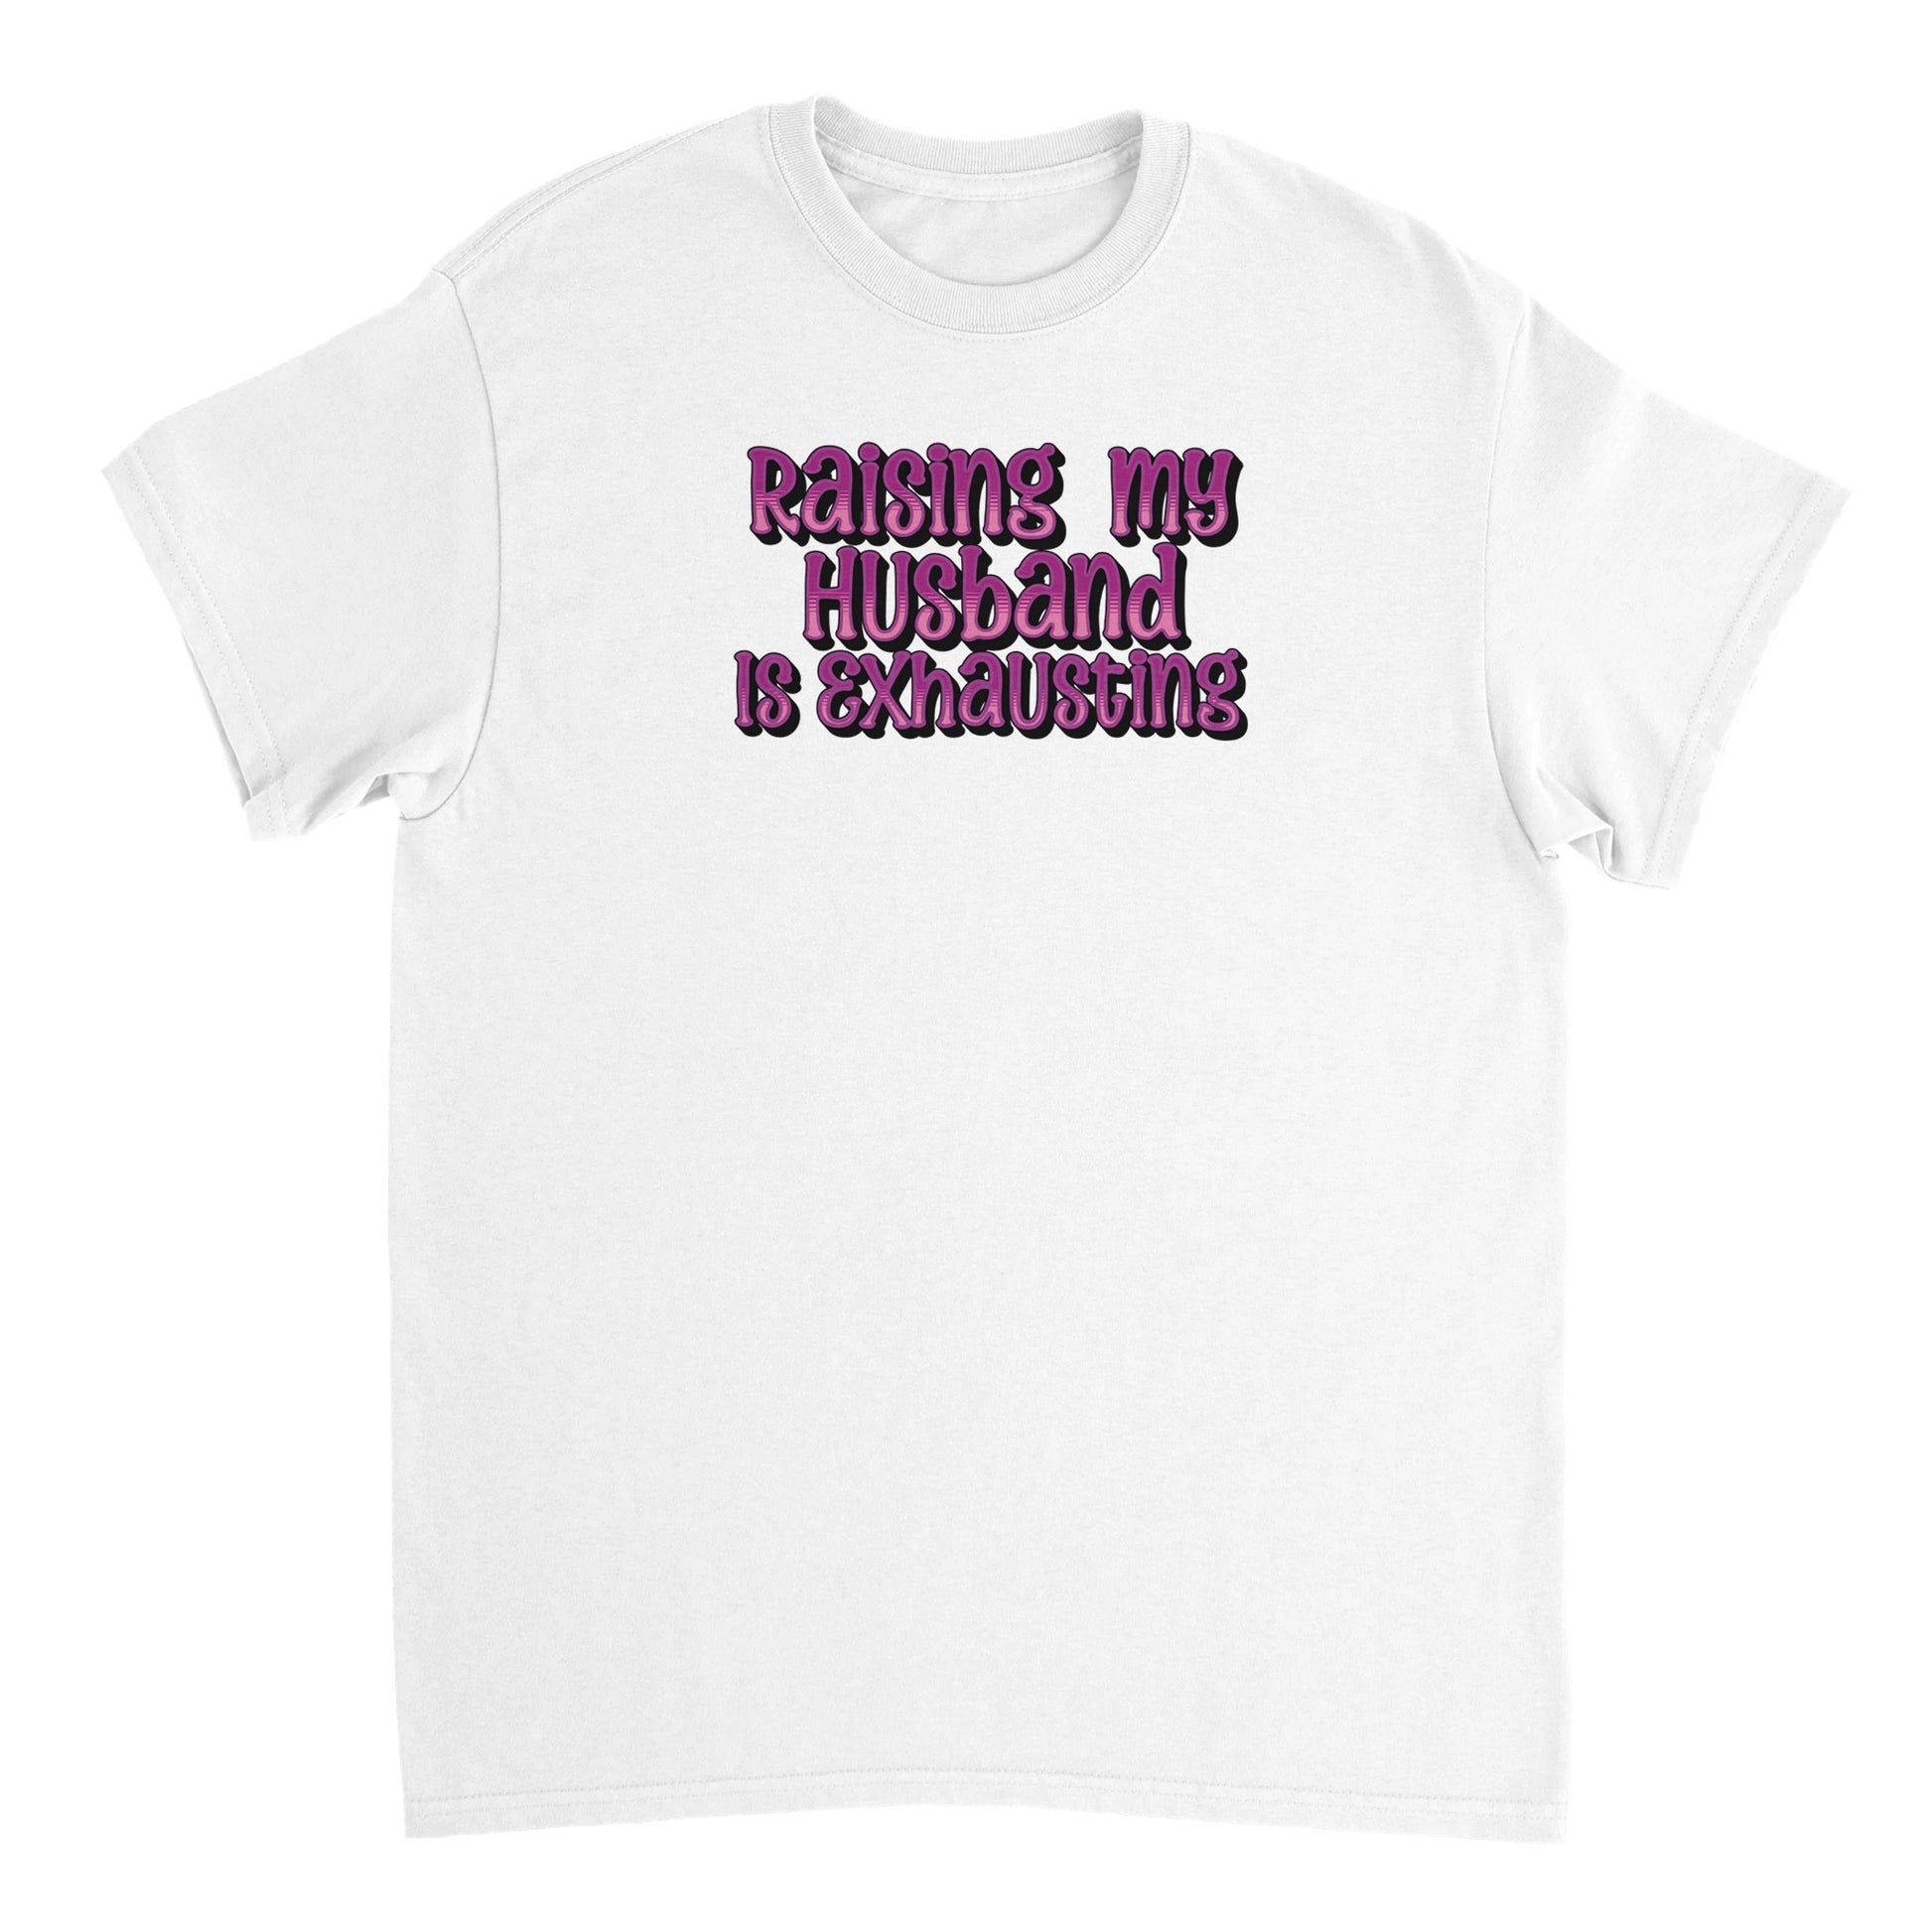 Raising My Husband is Exhausting T-shirt - Mister Snarky's